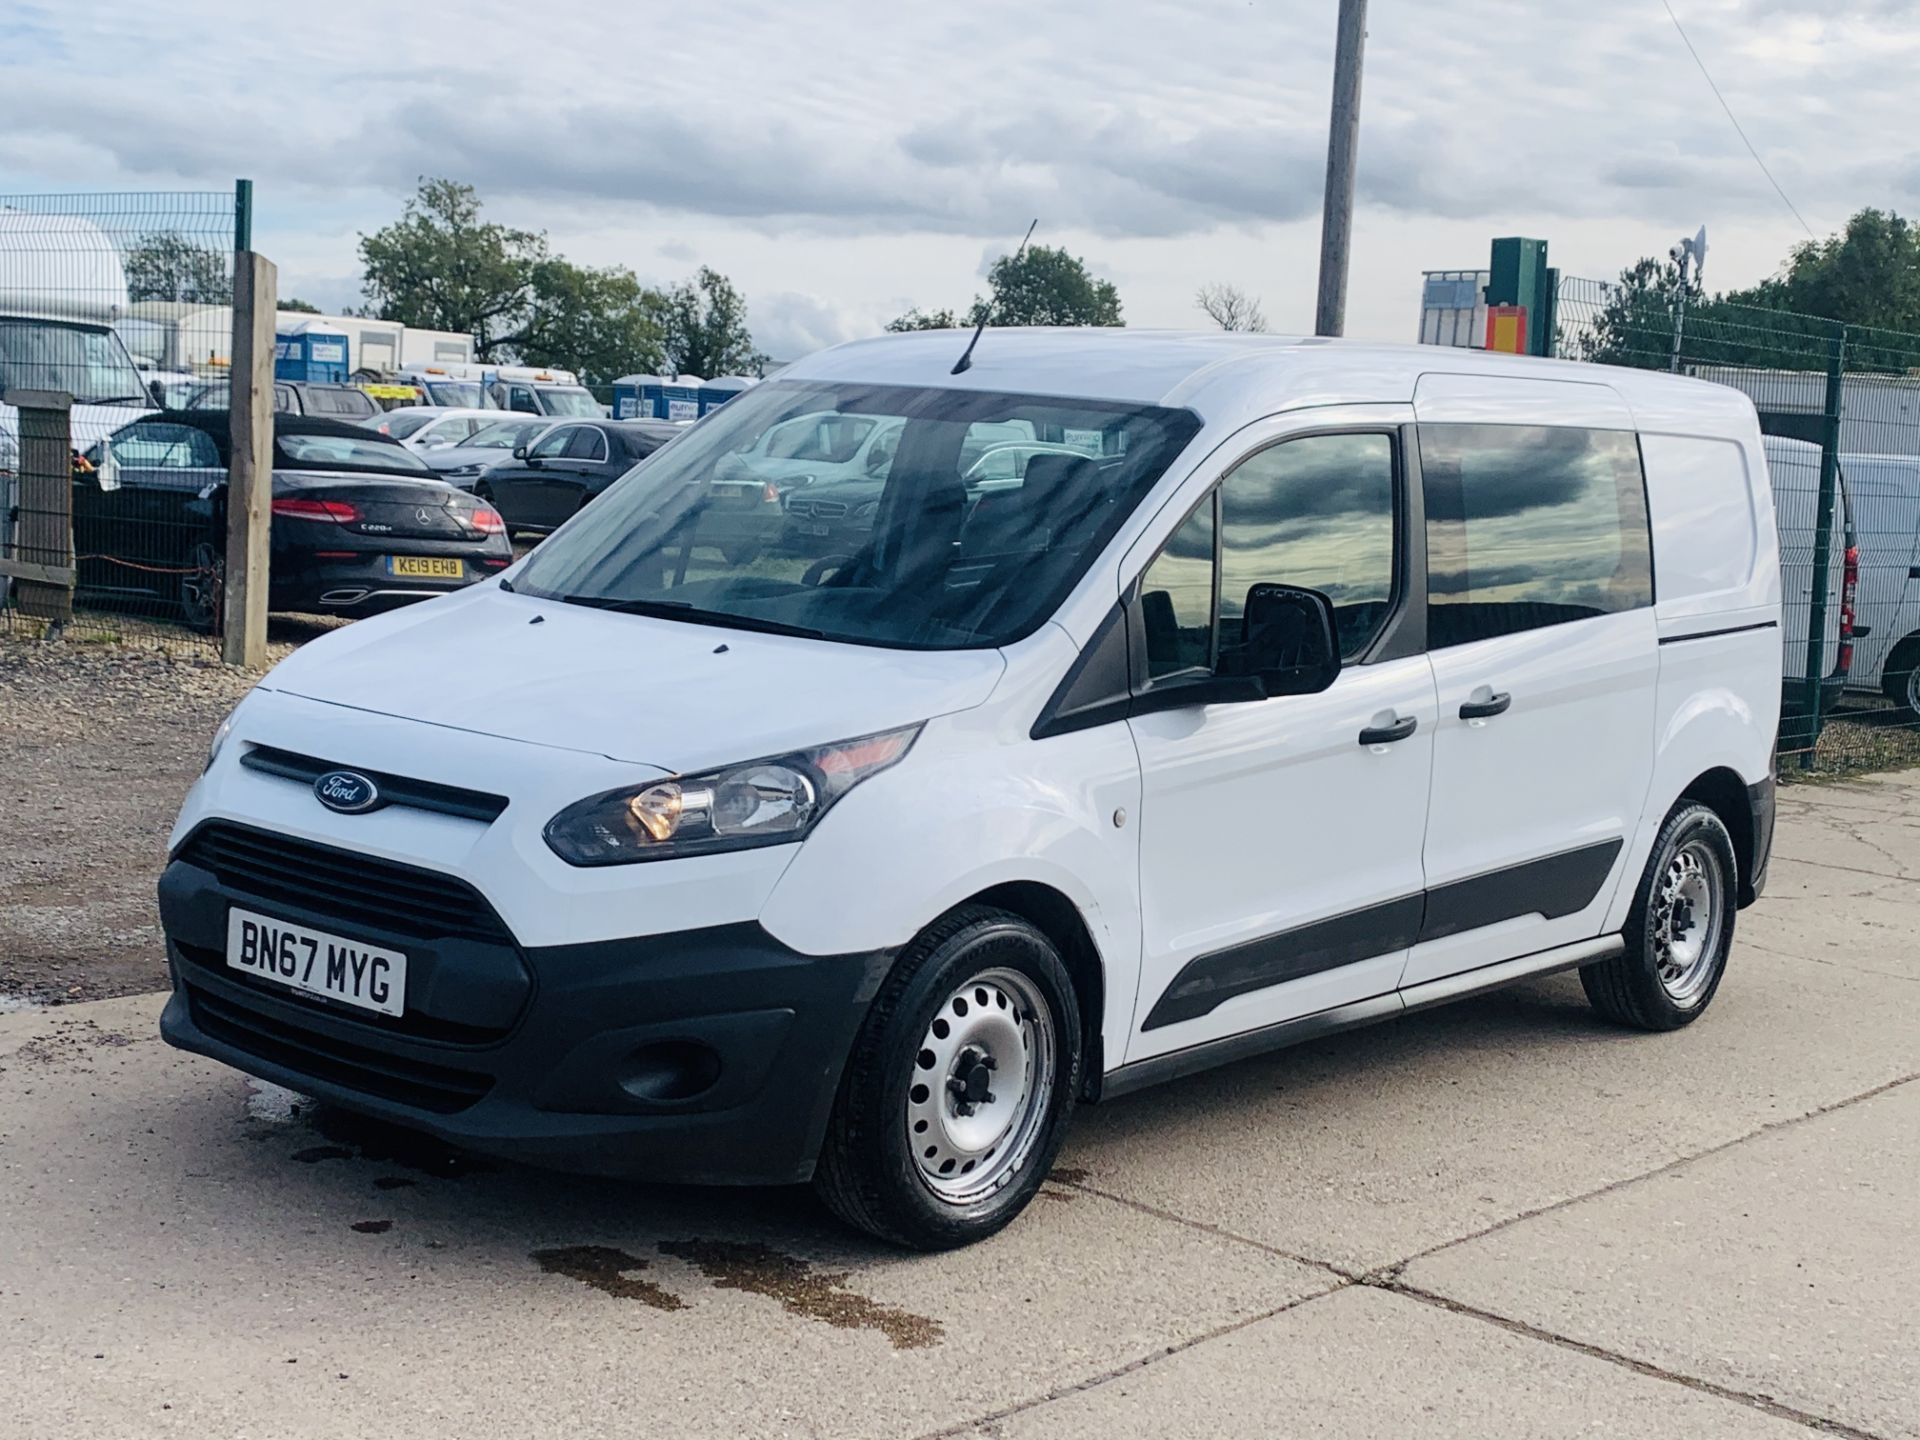 FORD TRANSIT CONNECT *LWB- 5 SEATER CREW VAN* (2018 - EURO 6) 1.5 TDCI - 100 BHP *AIR CON* (1 OWNER) - Image 6 of 40